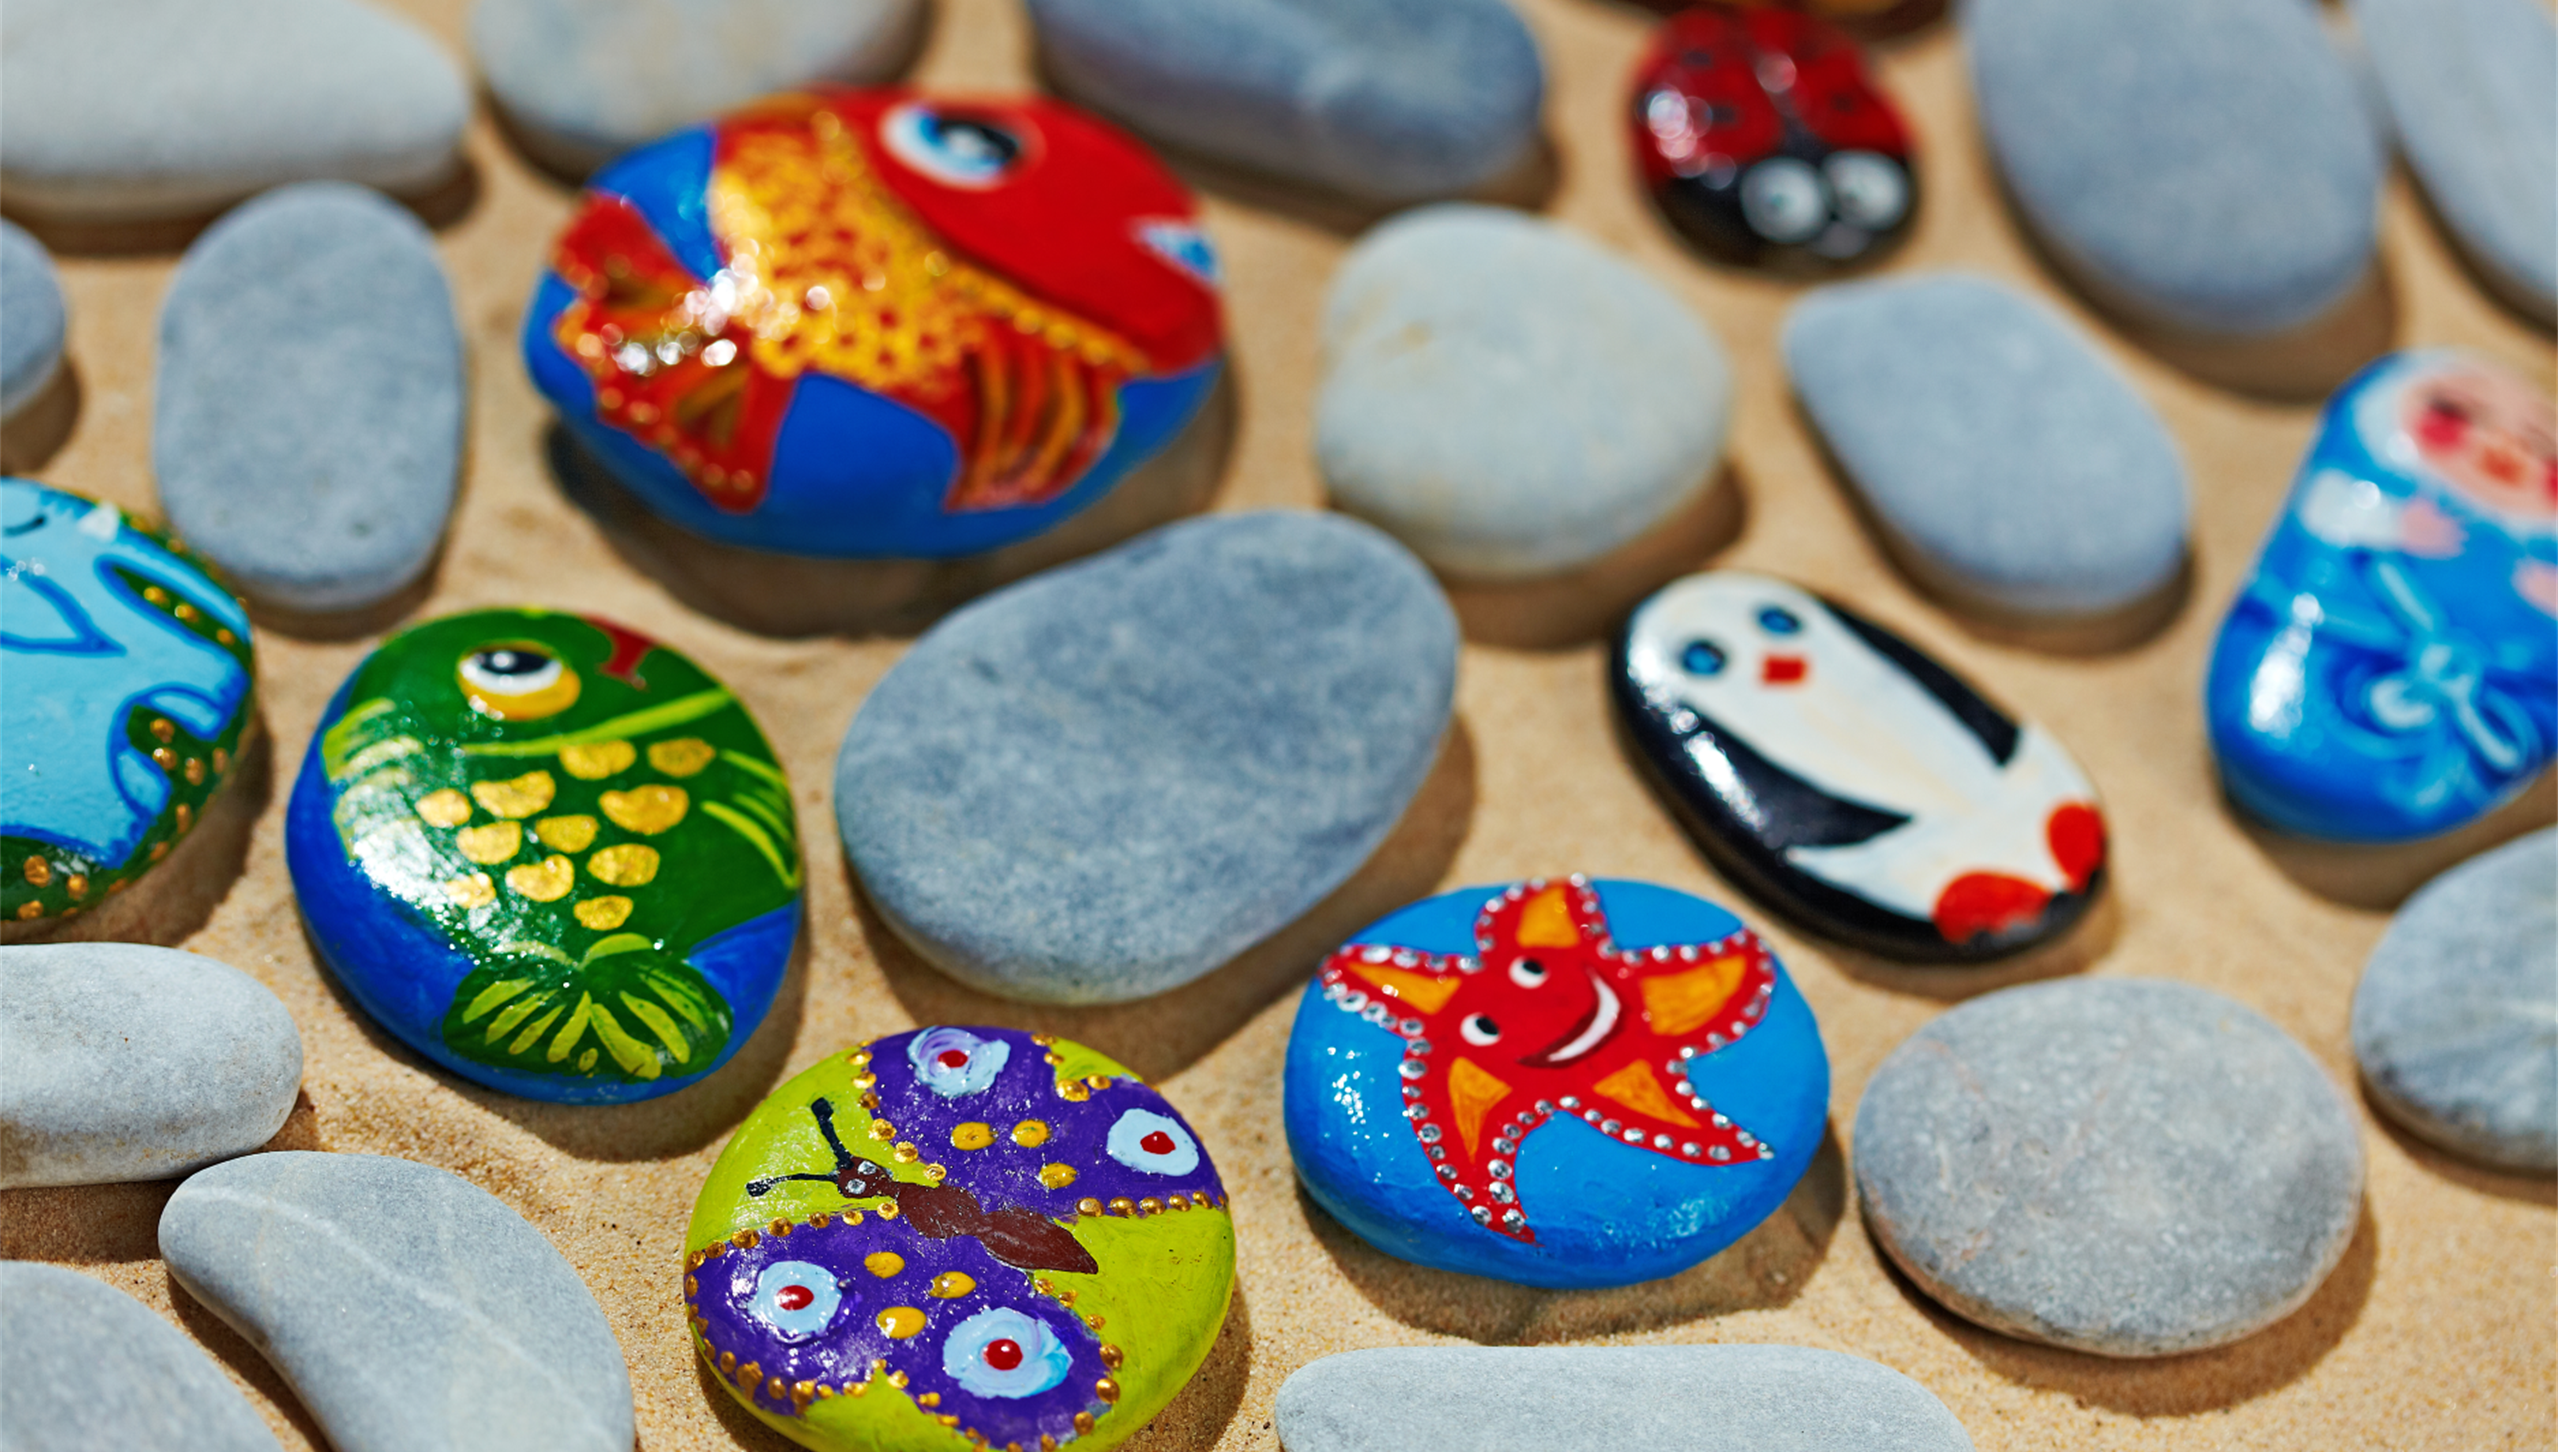 River rocks with brightly painted decorations